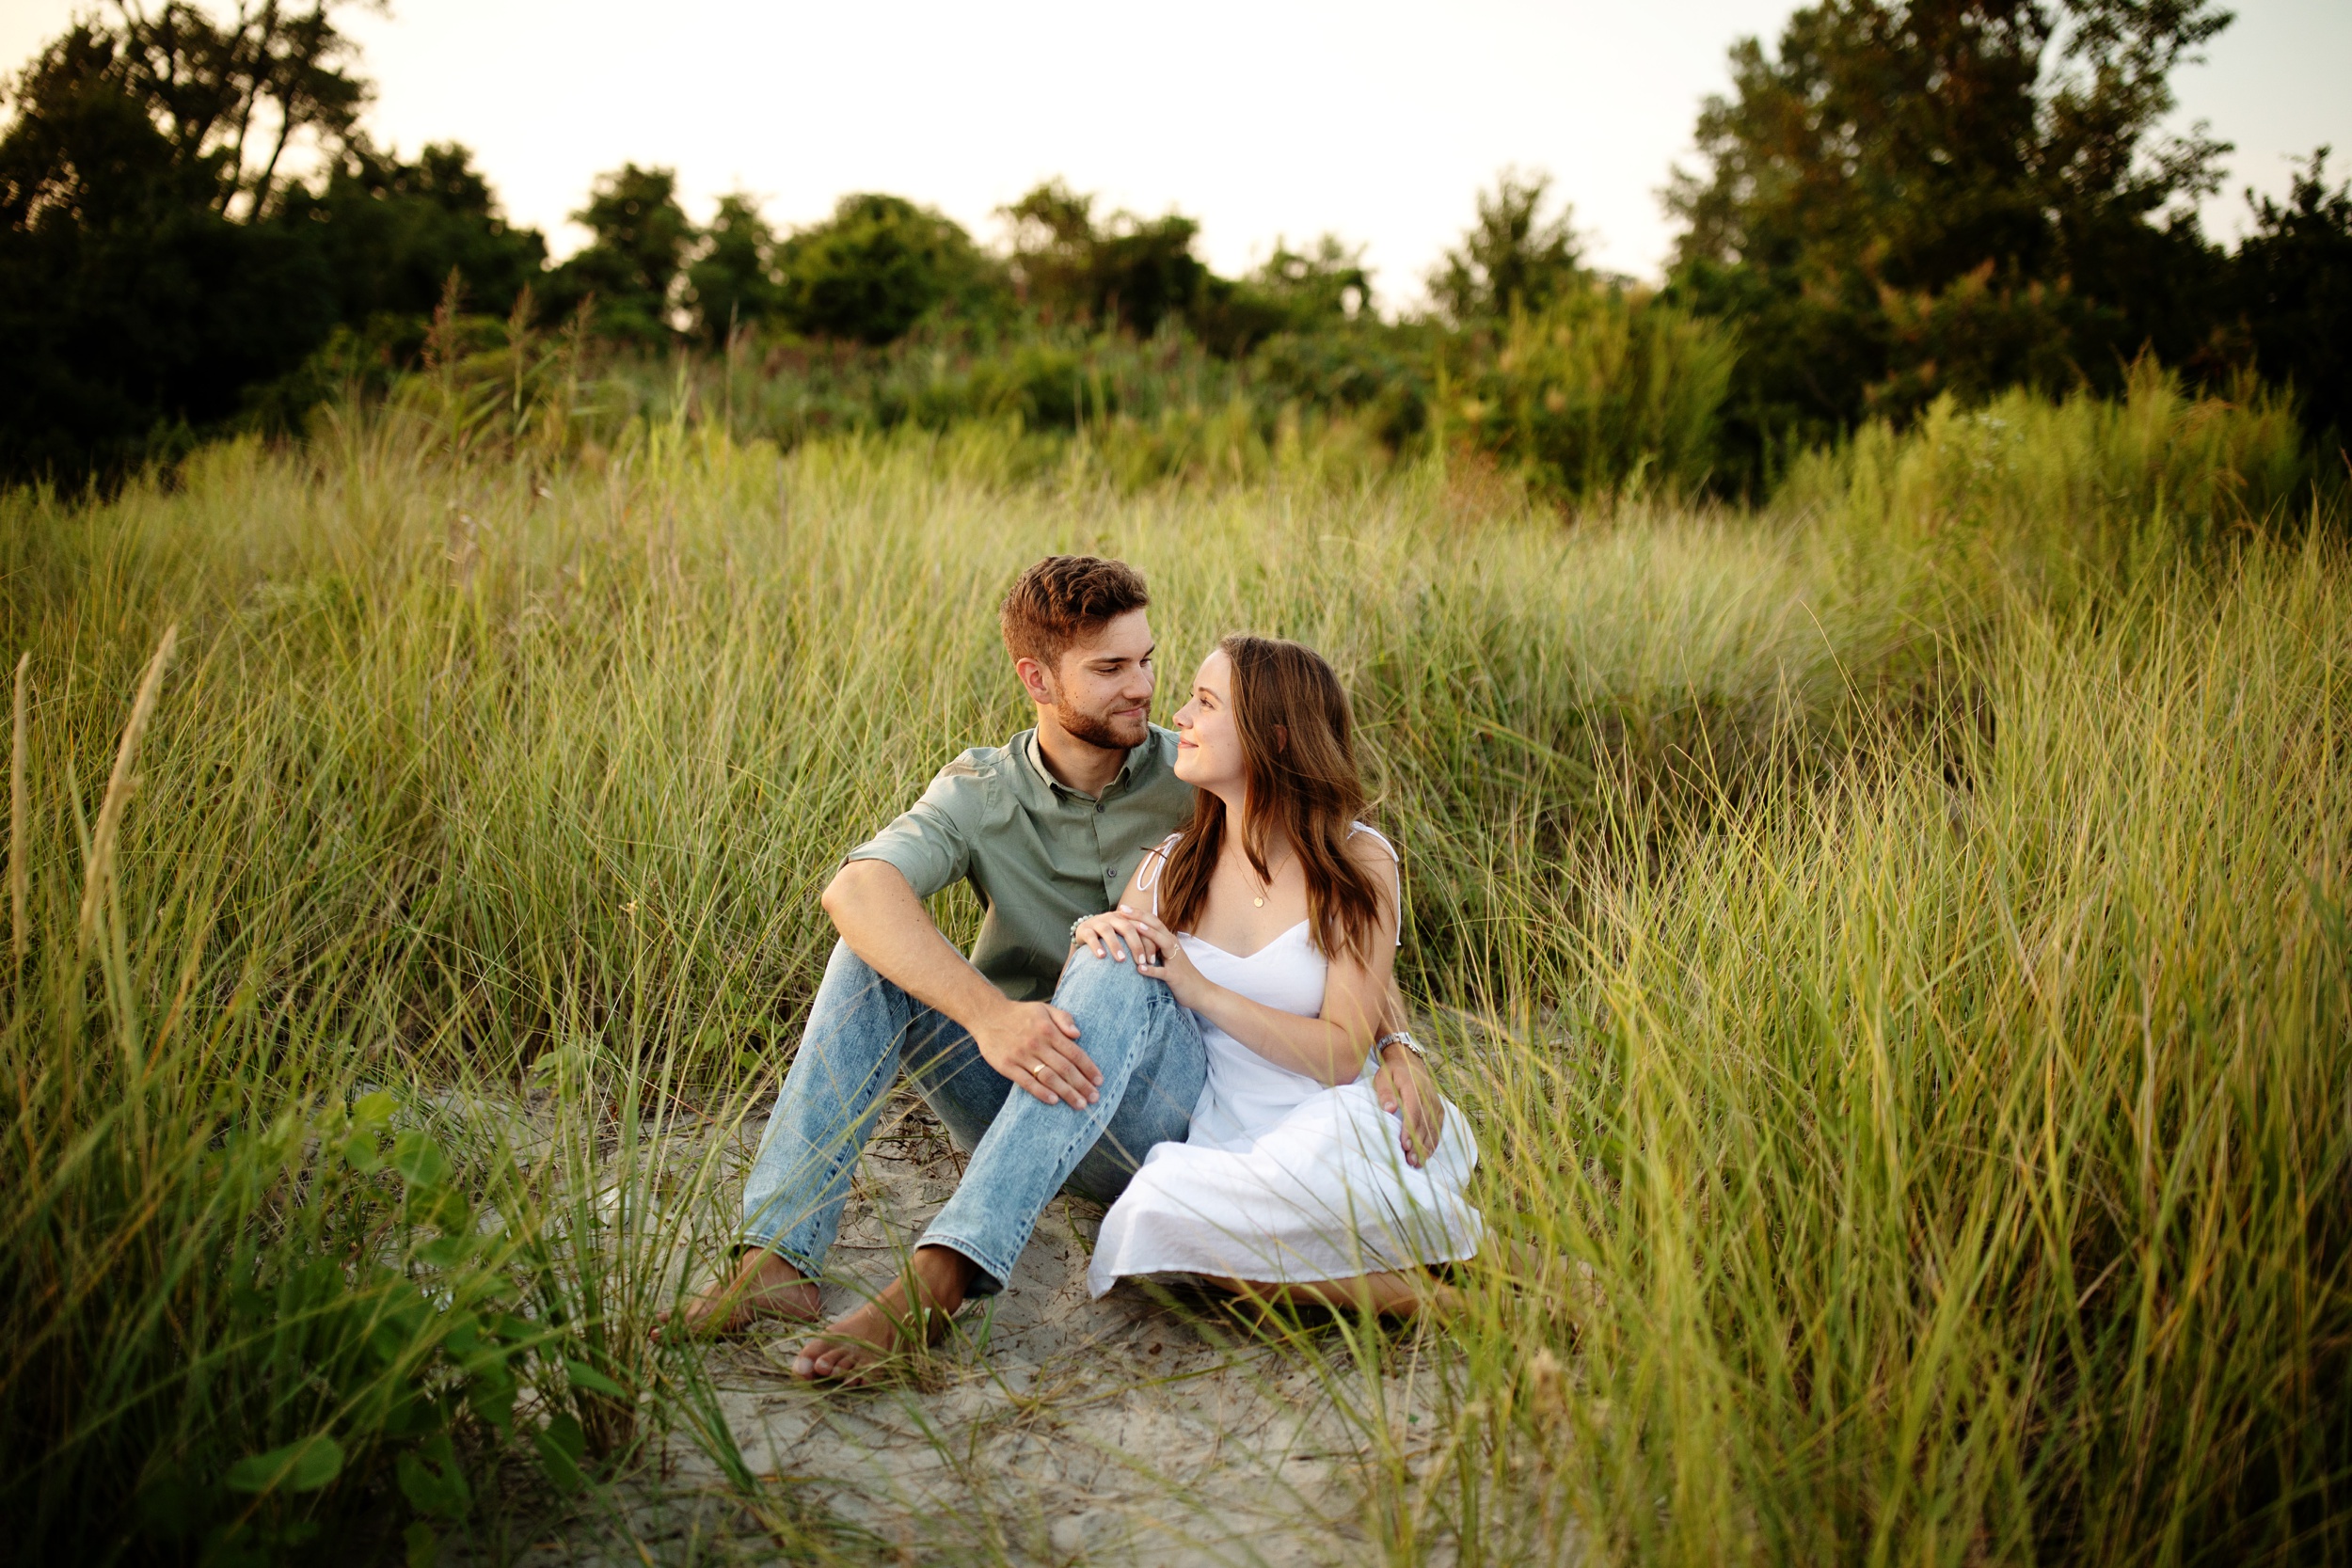 Cape May Engagement Photos-South Jersey Wedding and Engagement Photographer